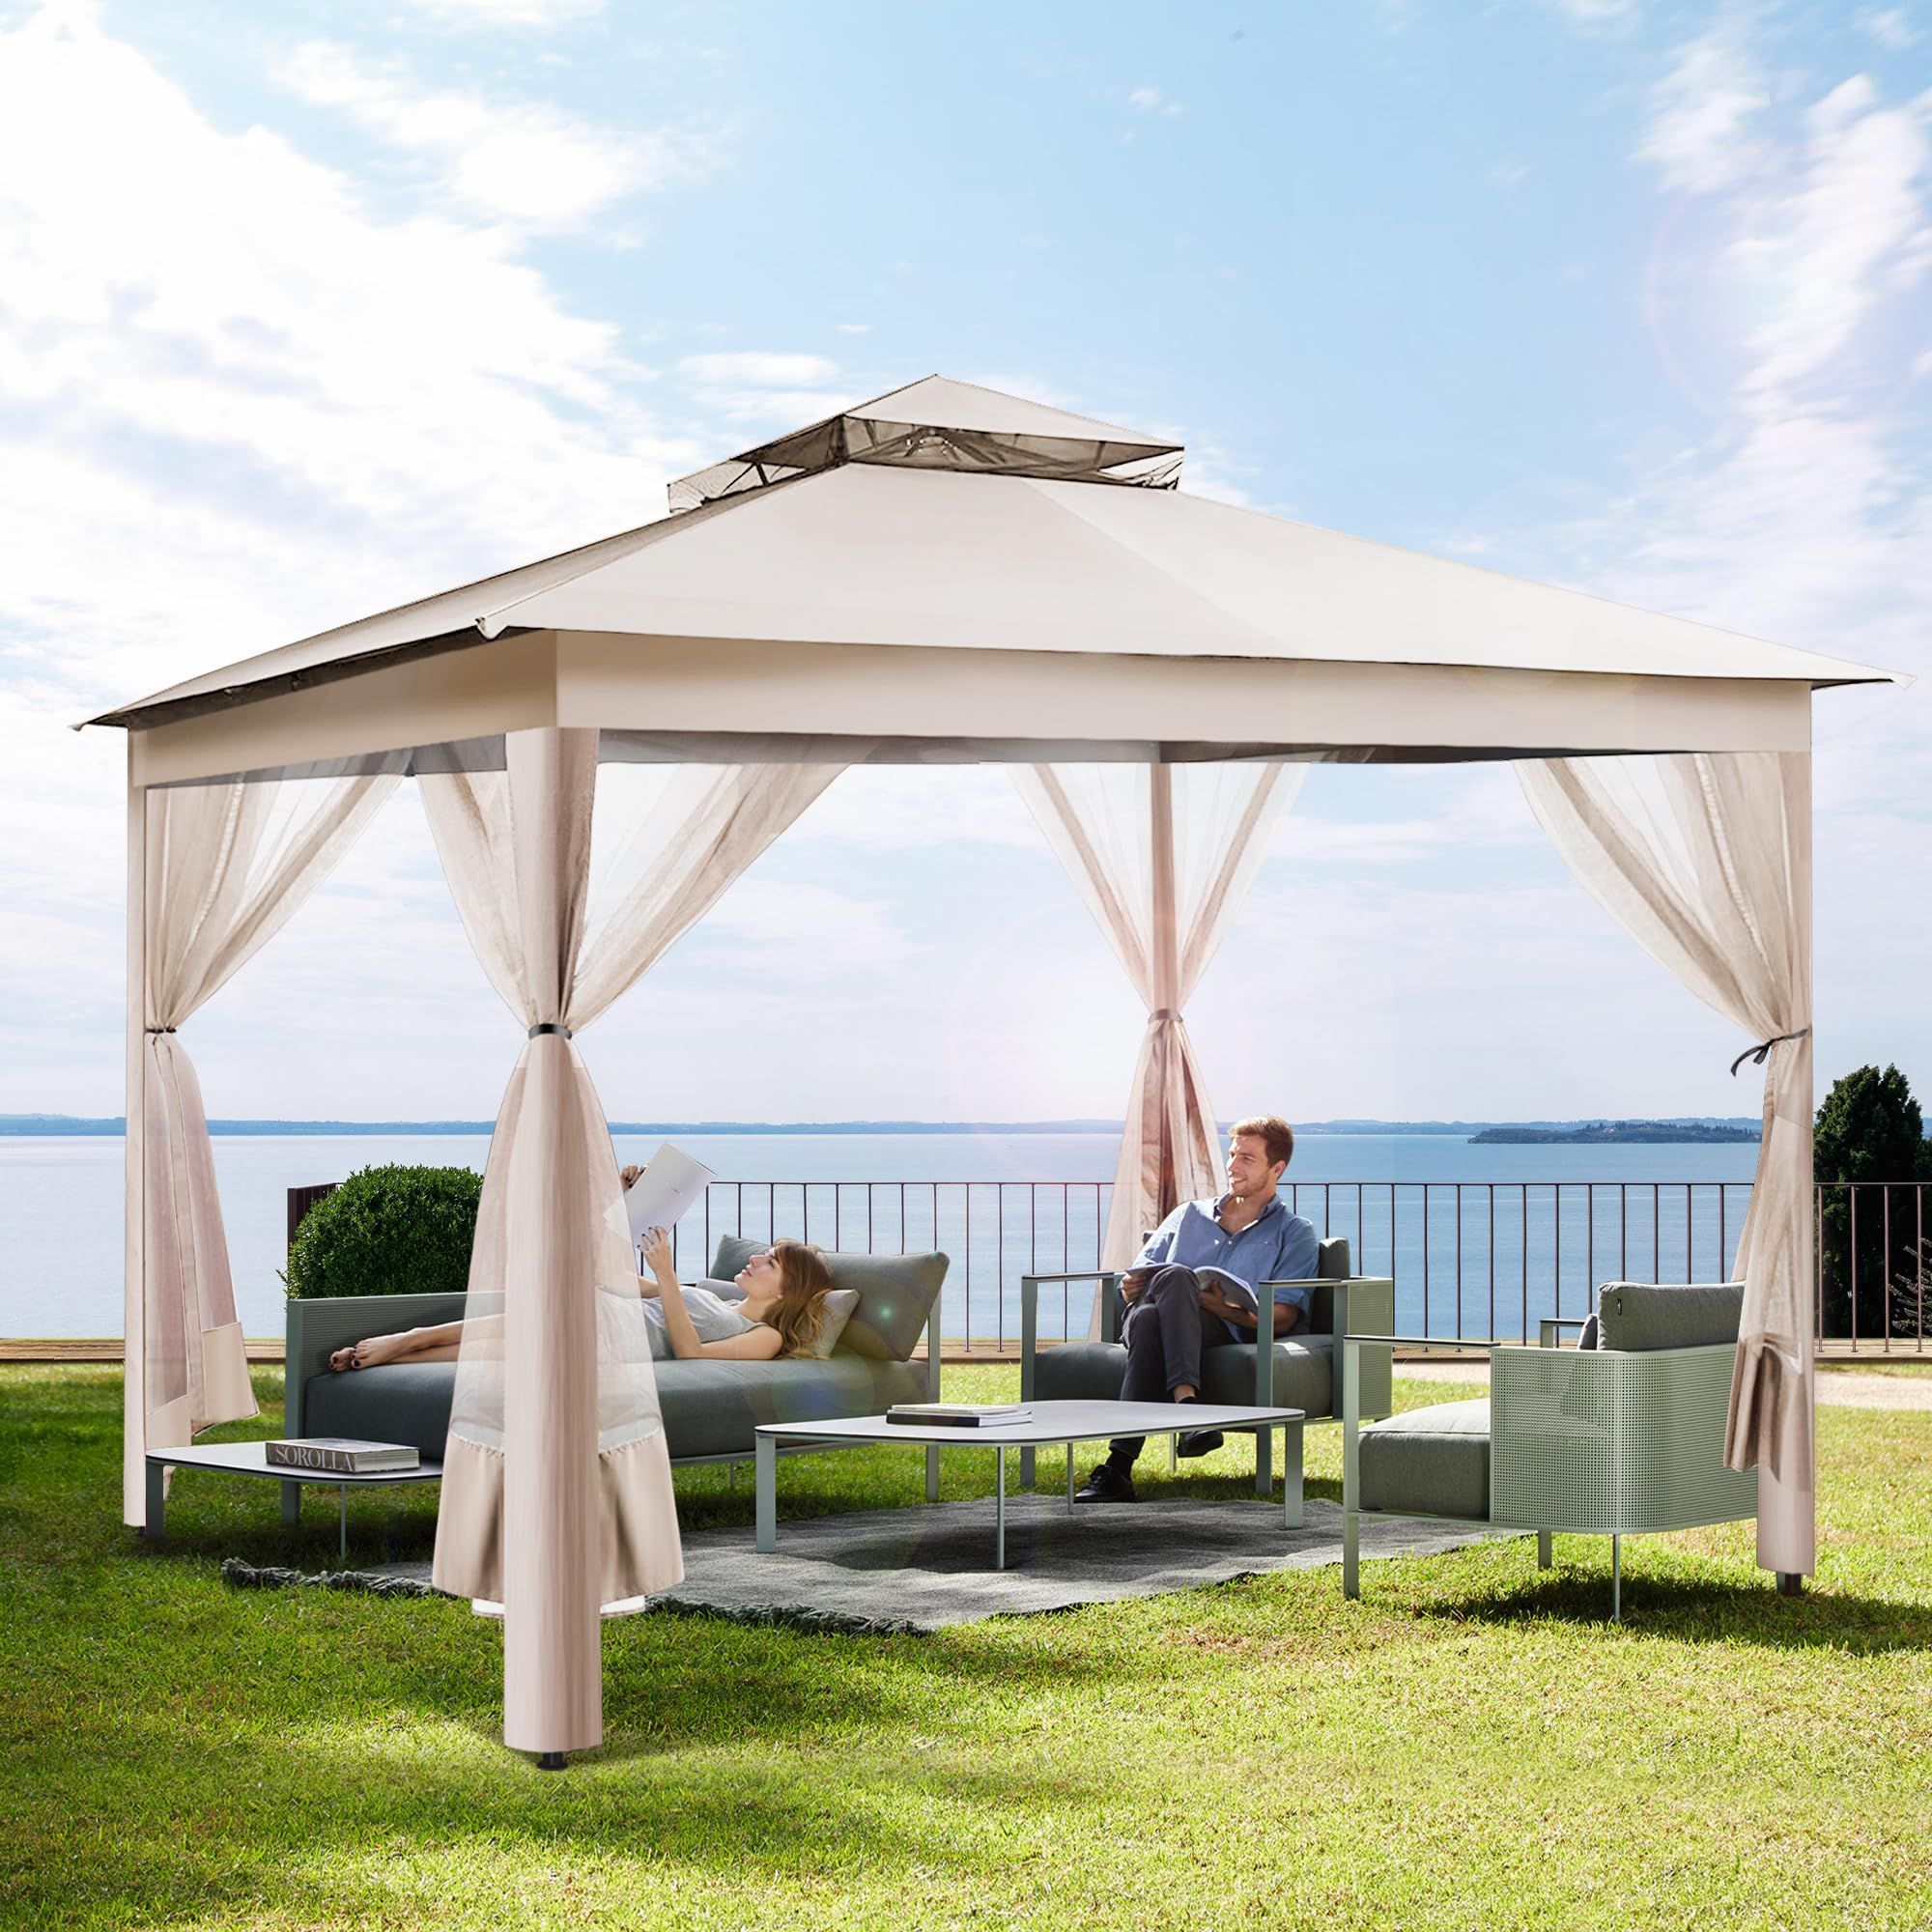 The Versatile Gazebo Canopy: A Must-Have Addition to Your Outdoor Space